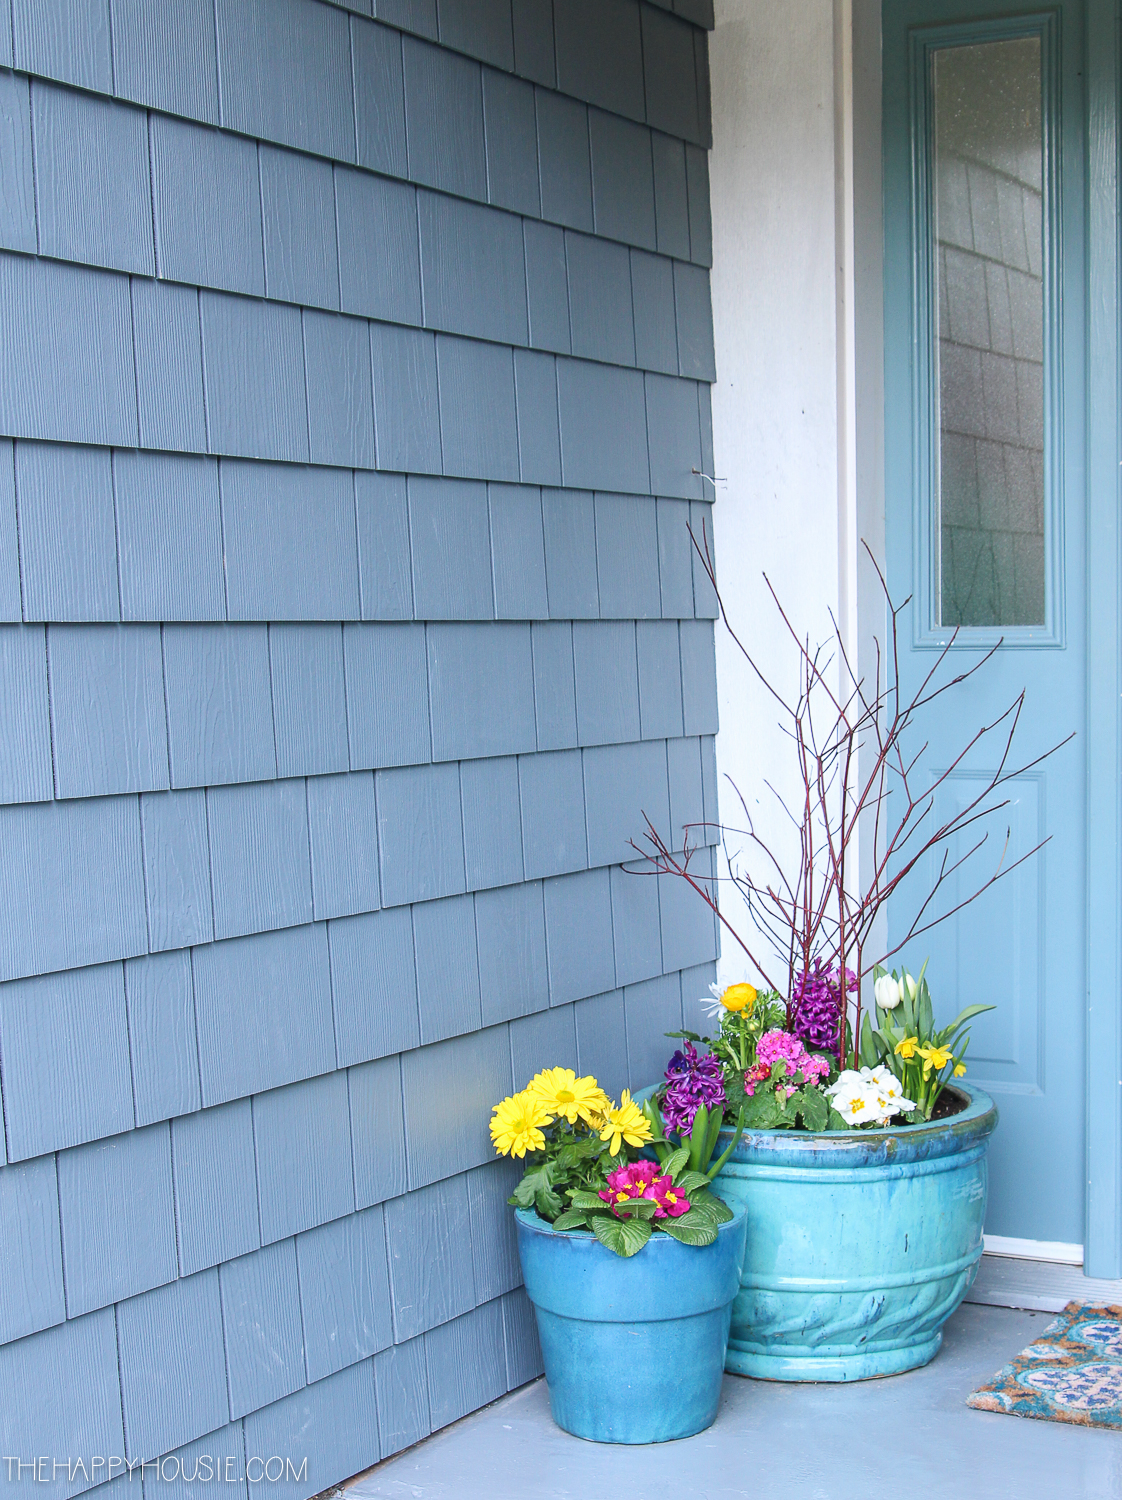 The front porch of the house with blue siding and blue flower pots.